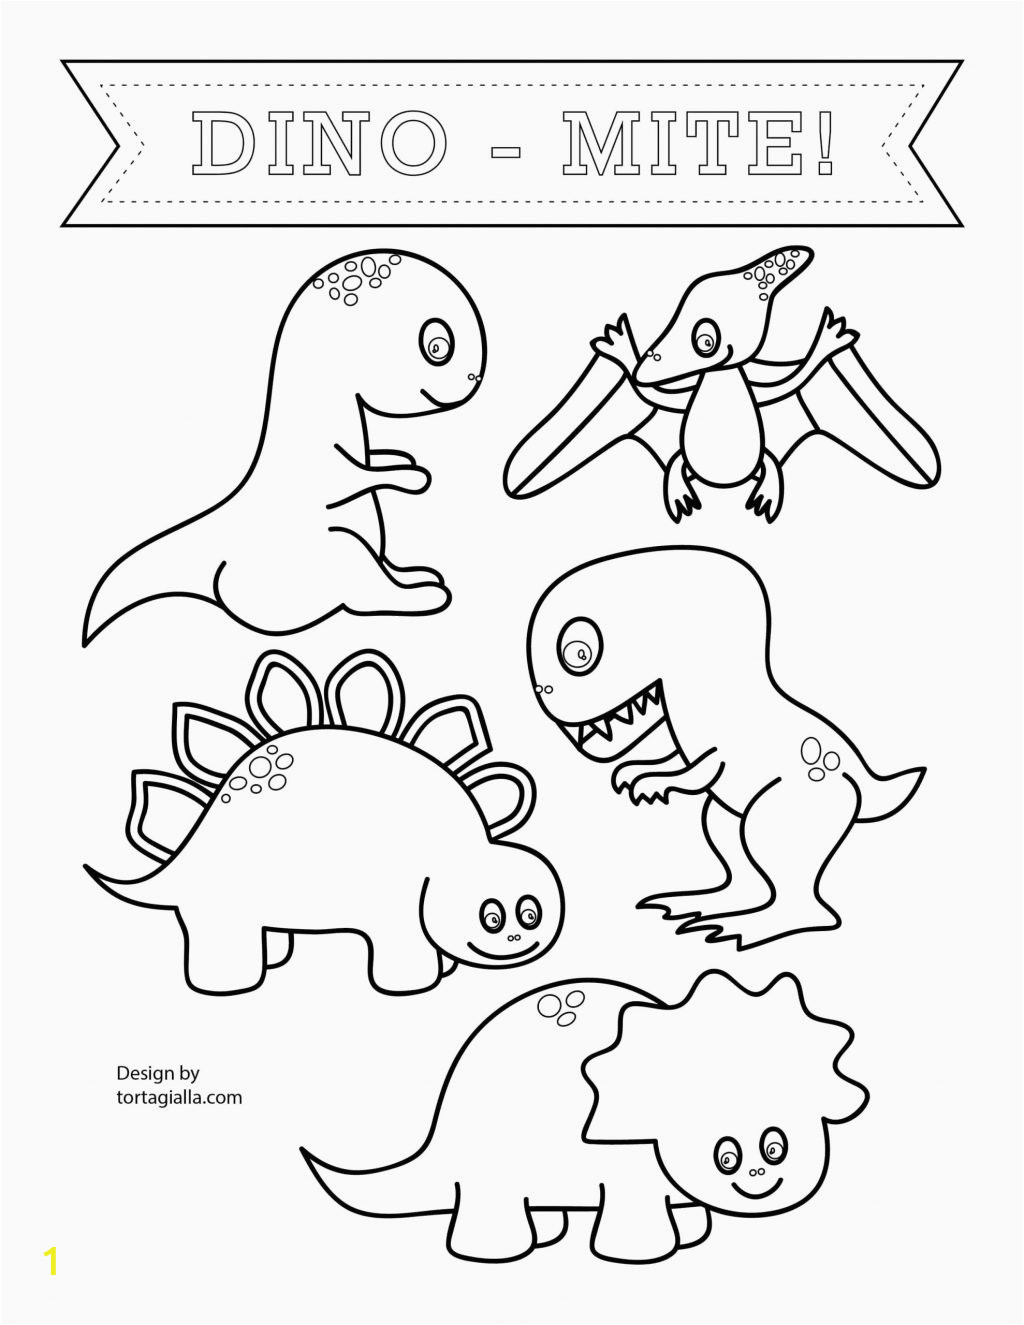 Put Me In the Zoo Coloring Page Kitchen Cabinet Put Me In the Zoo Colorings Free